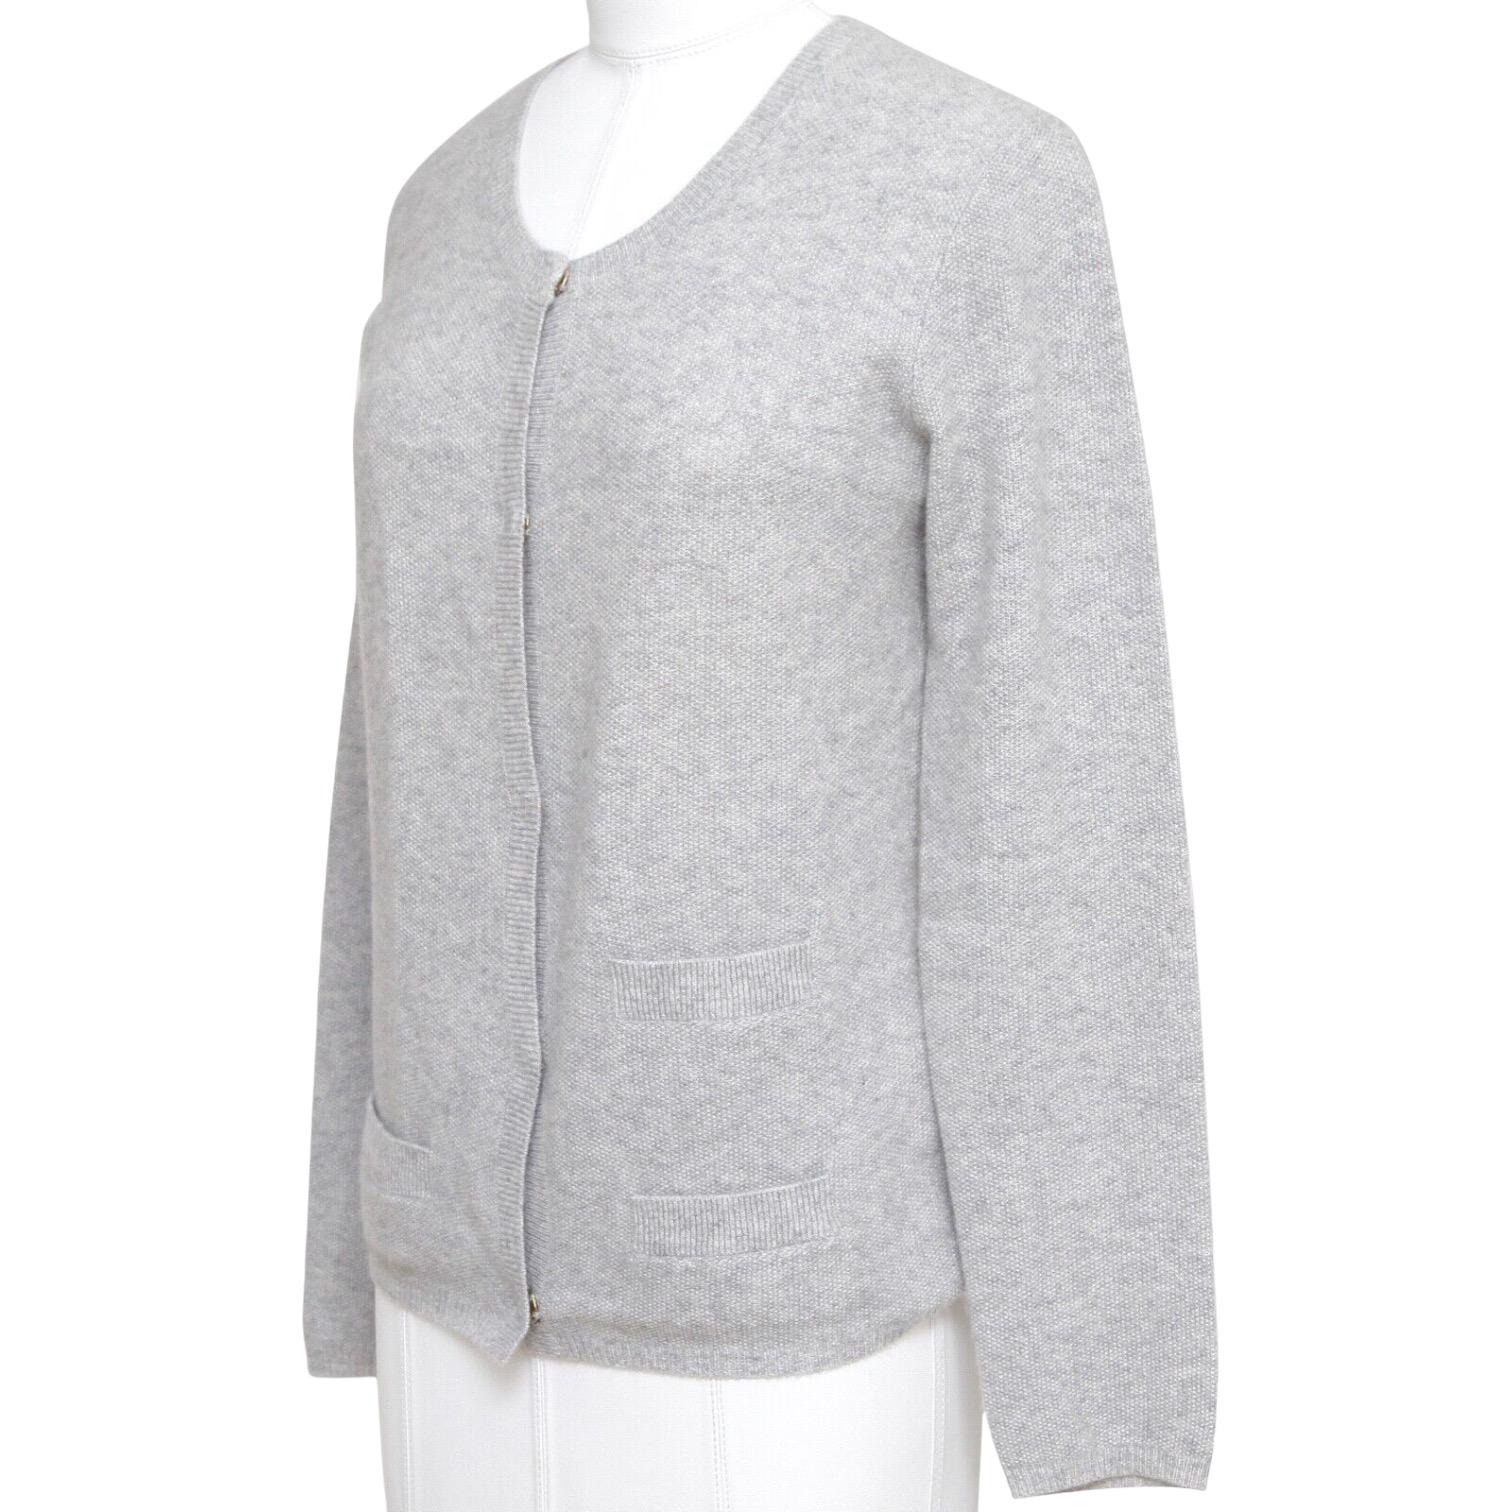 CHLOE Grey Cardigan Sweater Knit Cashmere Long Sleeve Snap Closure Sz XS In Excellent Condition For Sale In Hollywood, FL